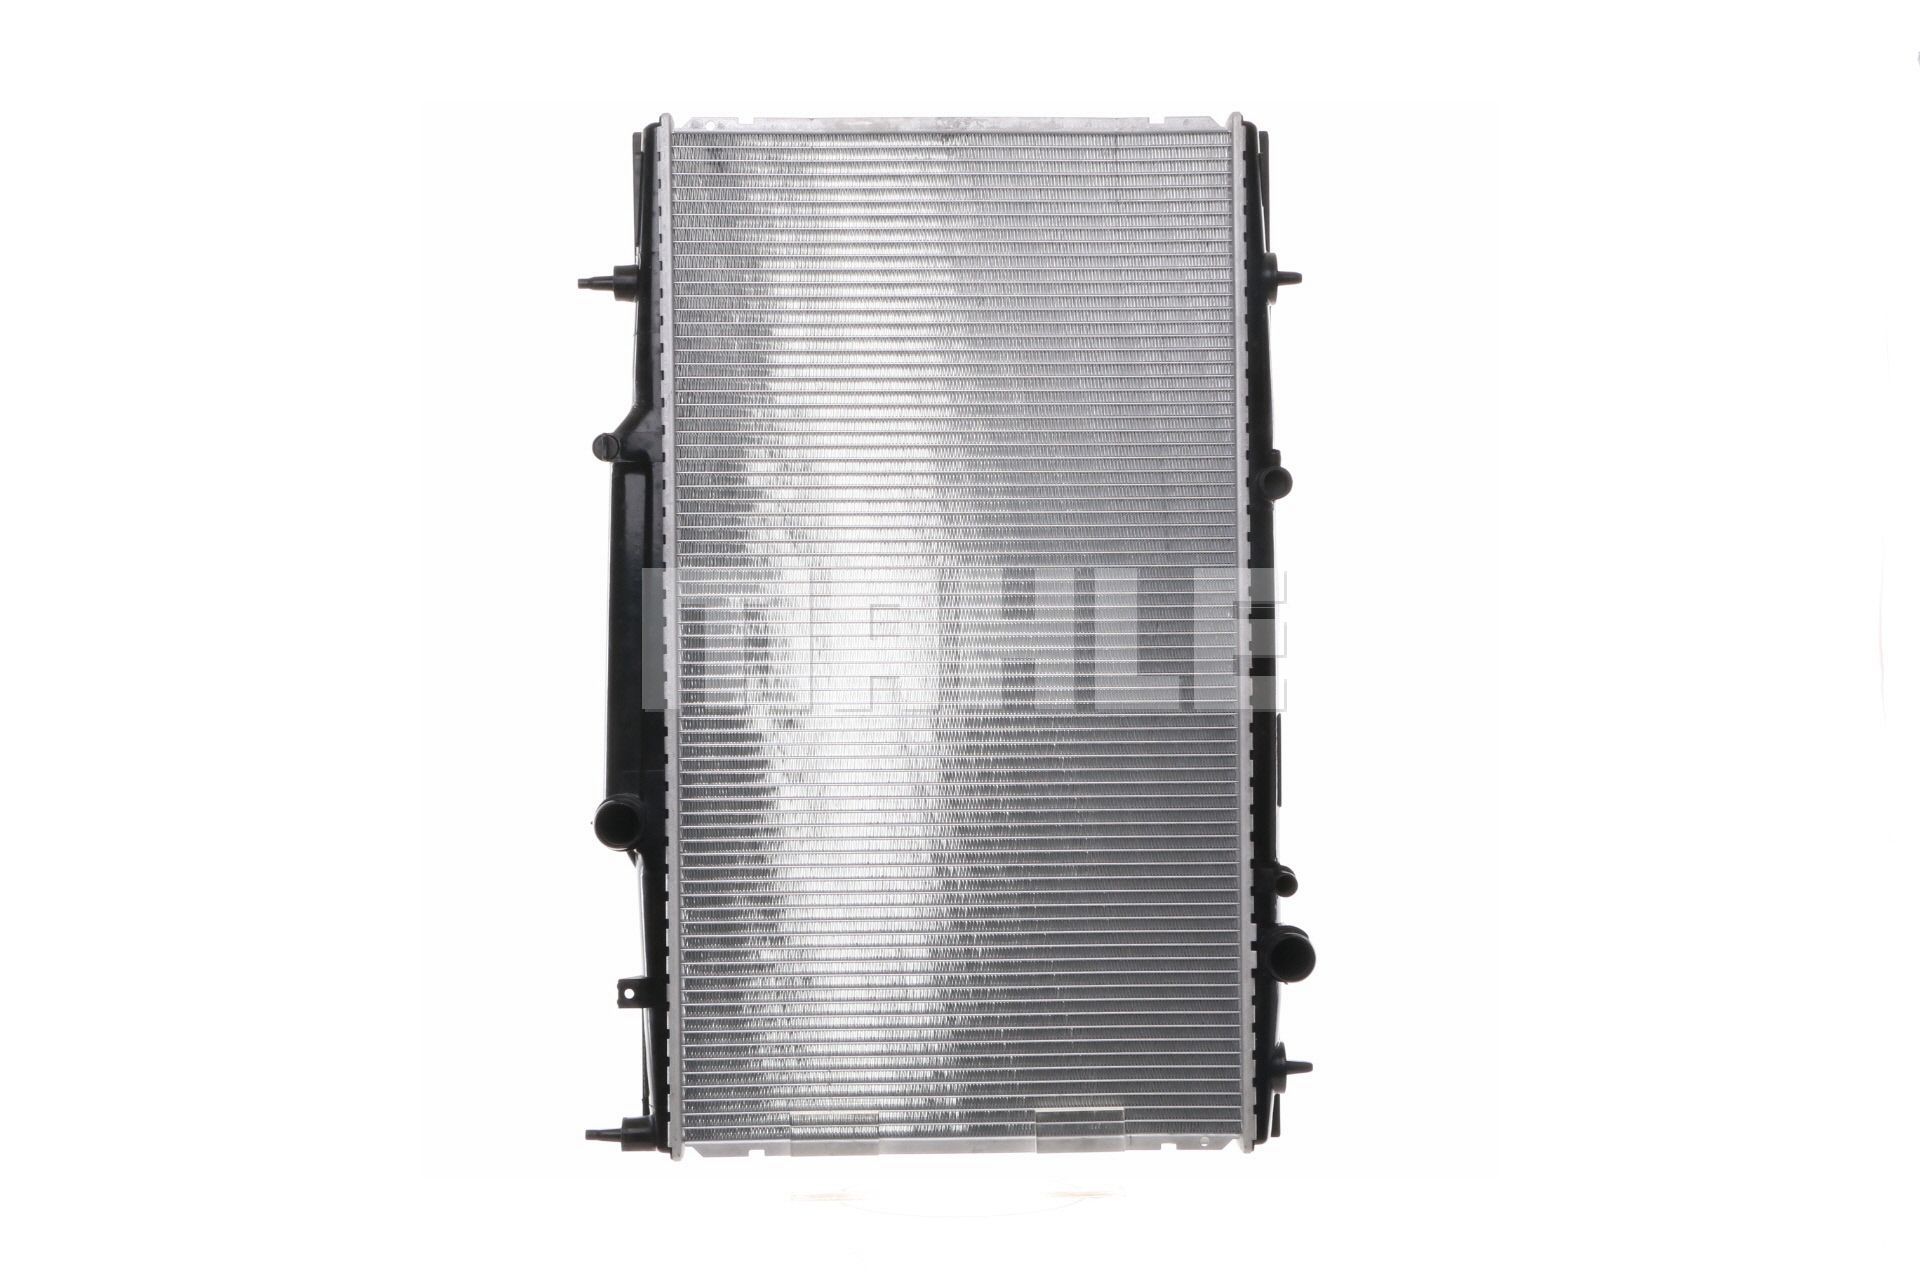 MAHLE ORIGINAL CR 503 000S Engine radiator for vehicles with/without air conditioning, 683 x 380 x 26 mm, Automatic Transmission, Brazed cooling fins